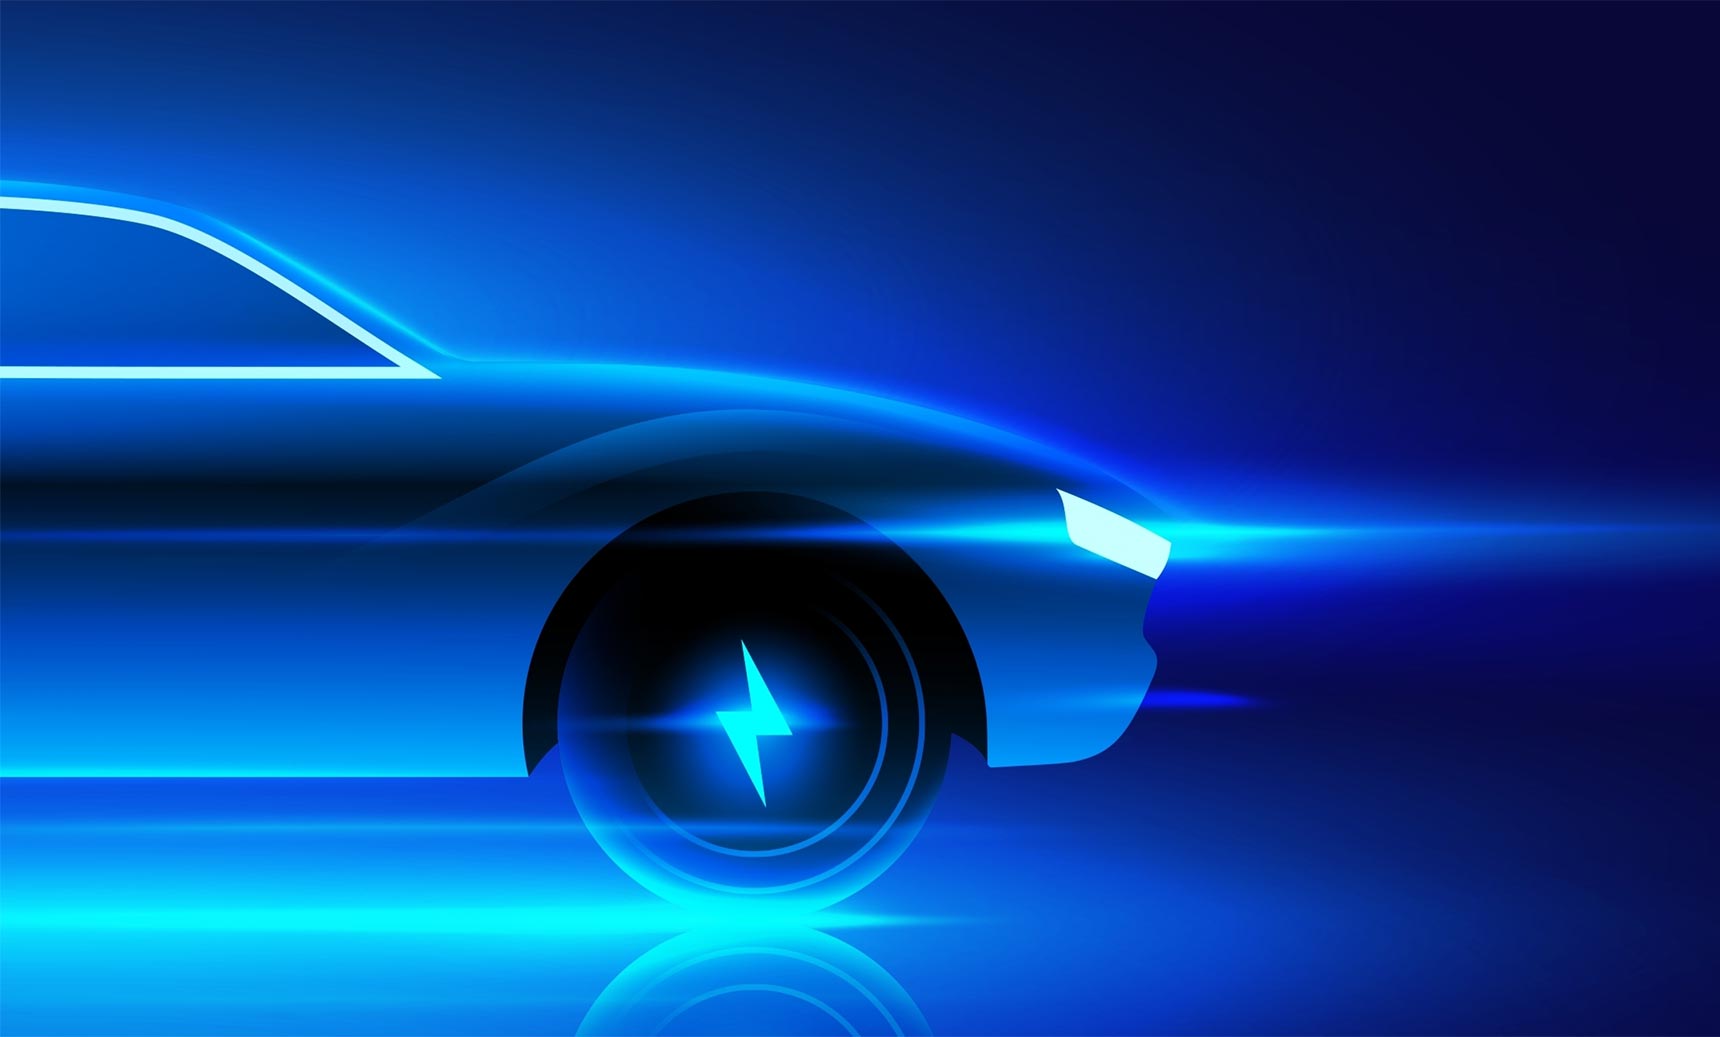 Illustration of a blue electric vehicle with light streaming from it against a black background.